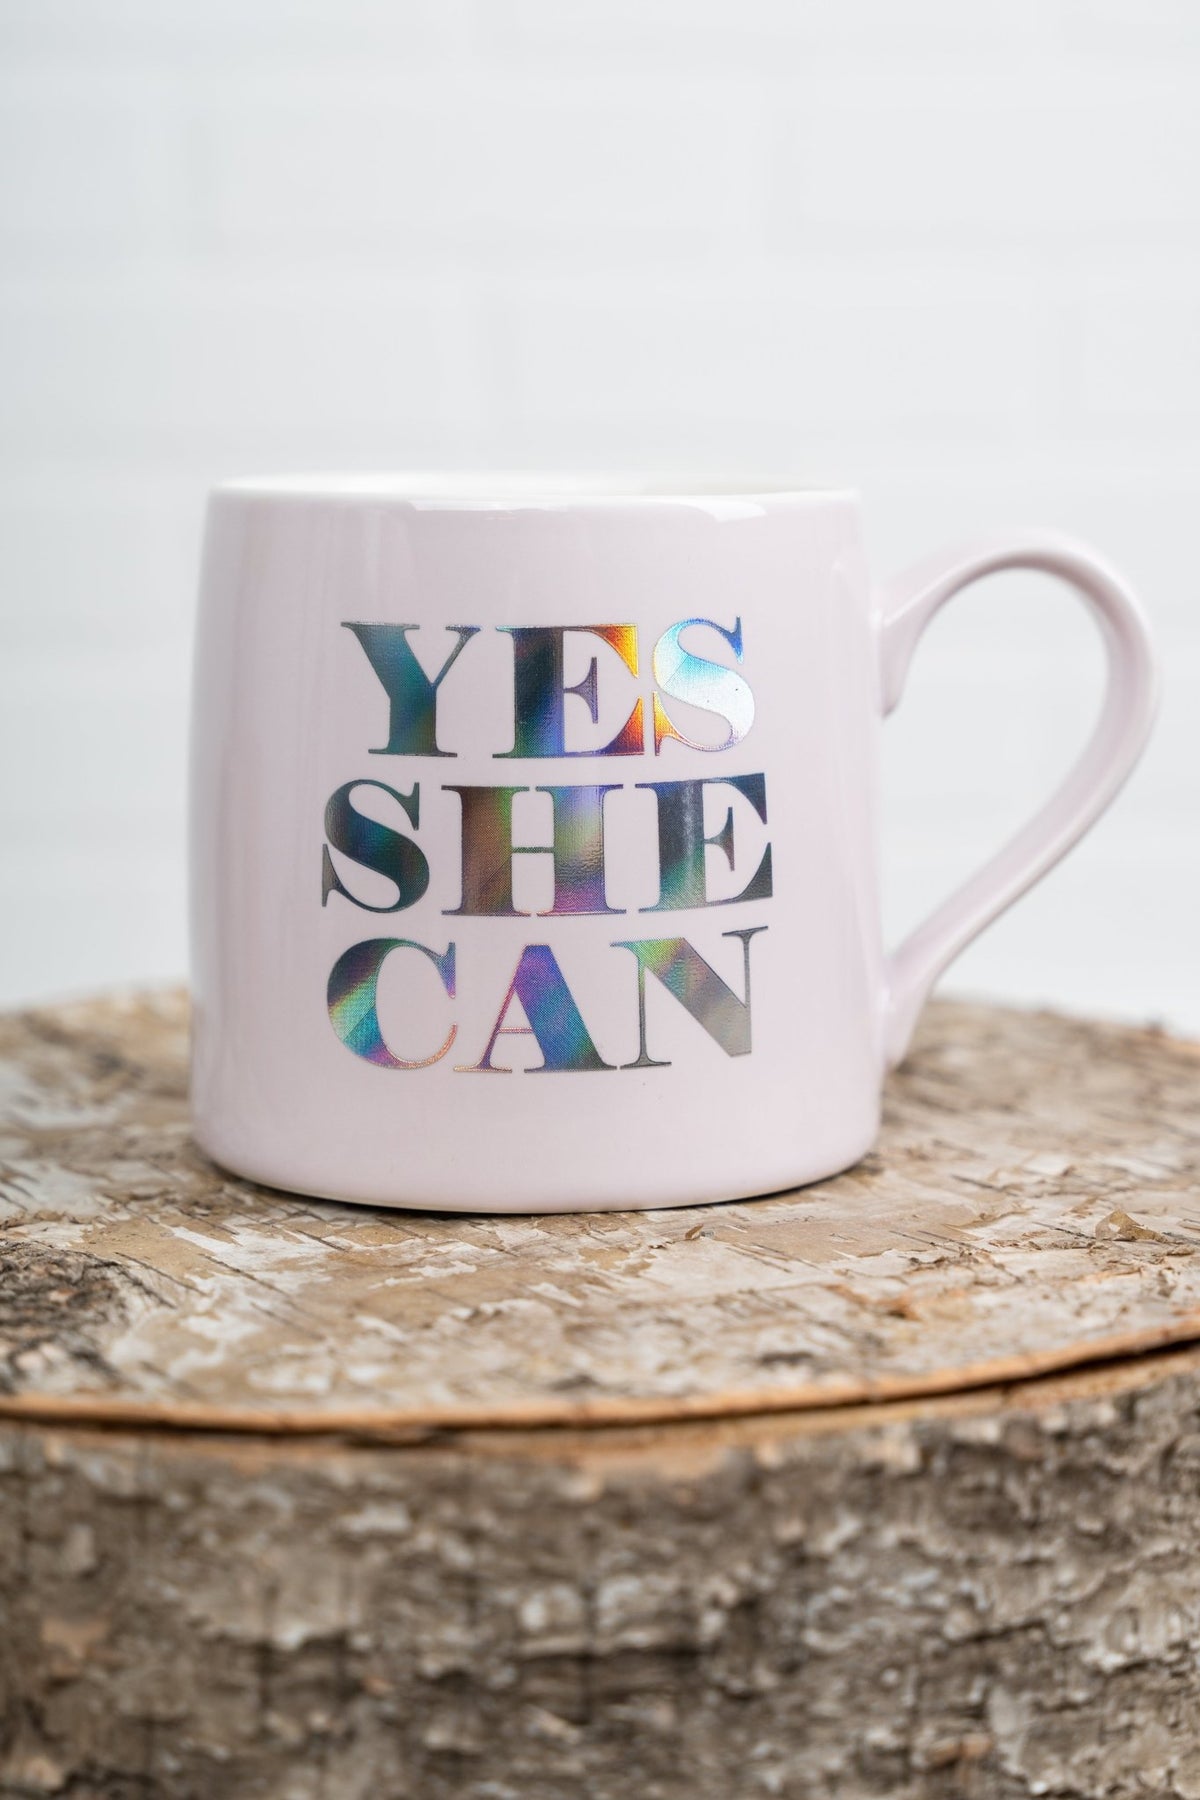 Yes she can jumbo coffee mug - Trendy Tumblers, Mugs and Cups at Lush Fashion Lounge Boutique in Oklahoma City